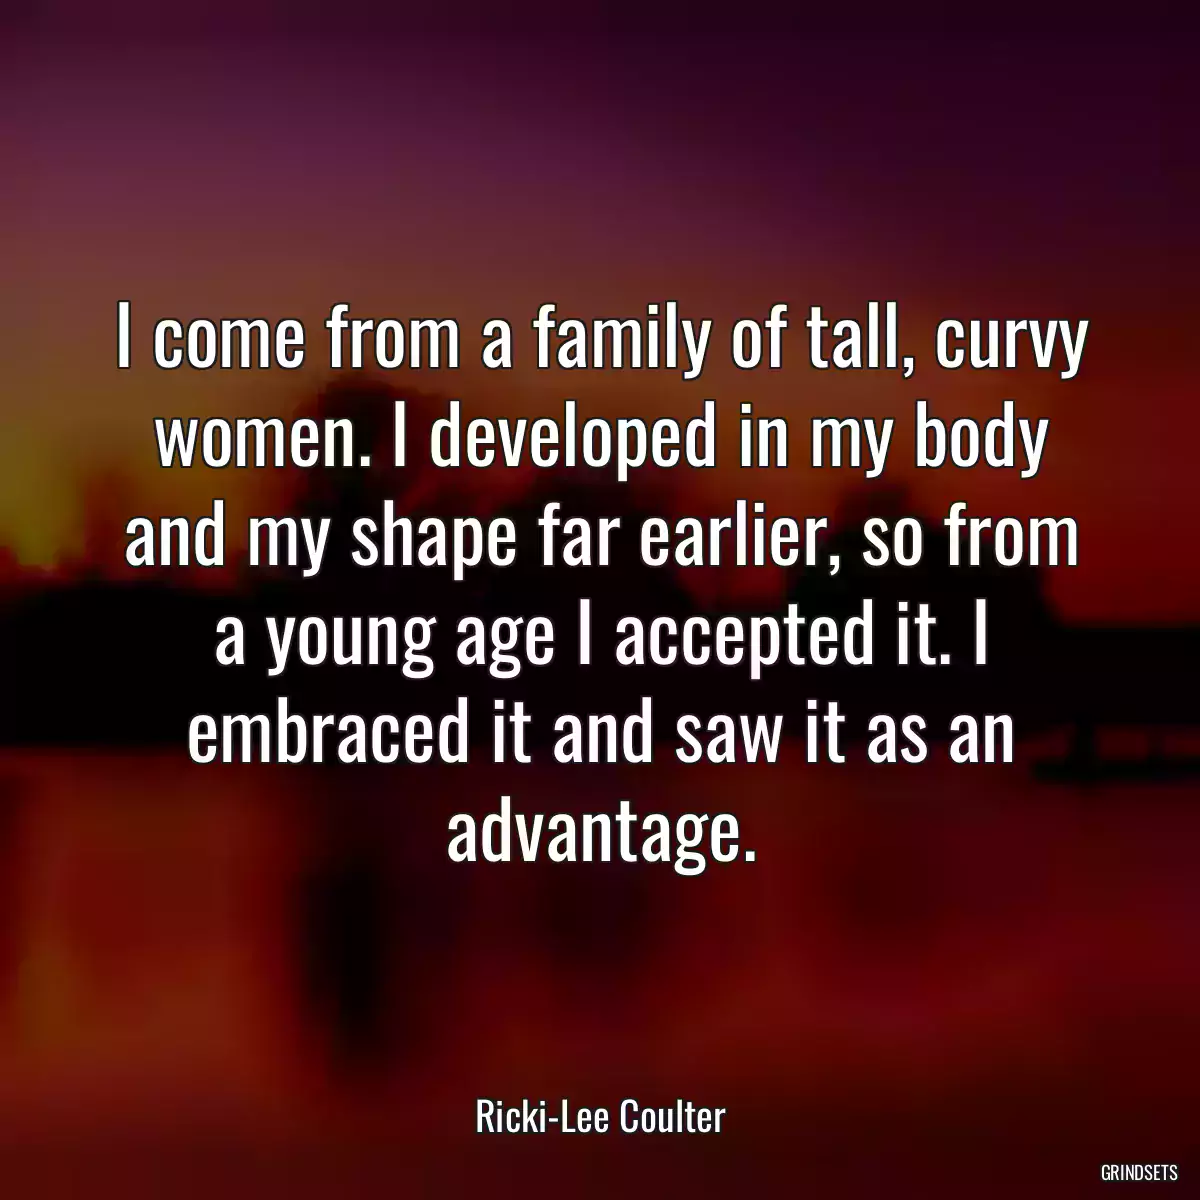 I come from a family of tall, curvy women. I developed in my body and my shape far earlier, so from a young age I accepted it. I embraced it and saw it as an advantage.